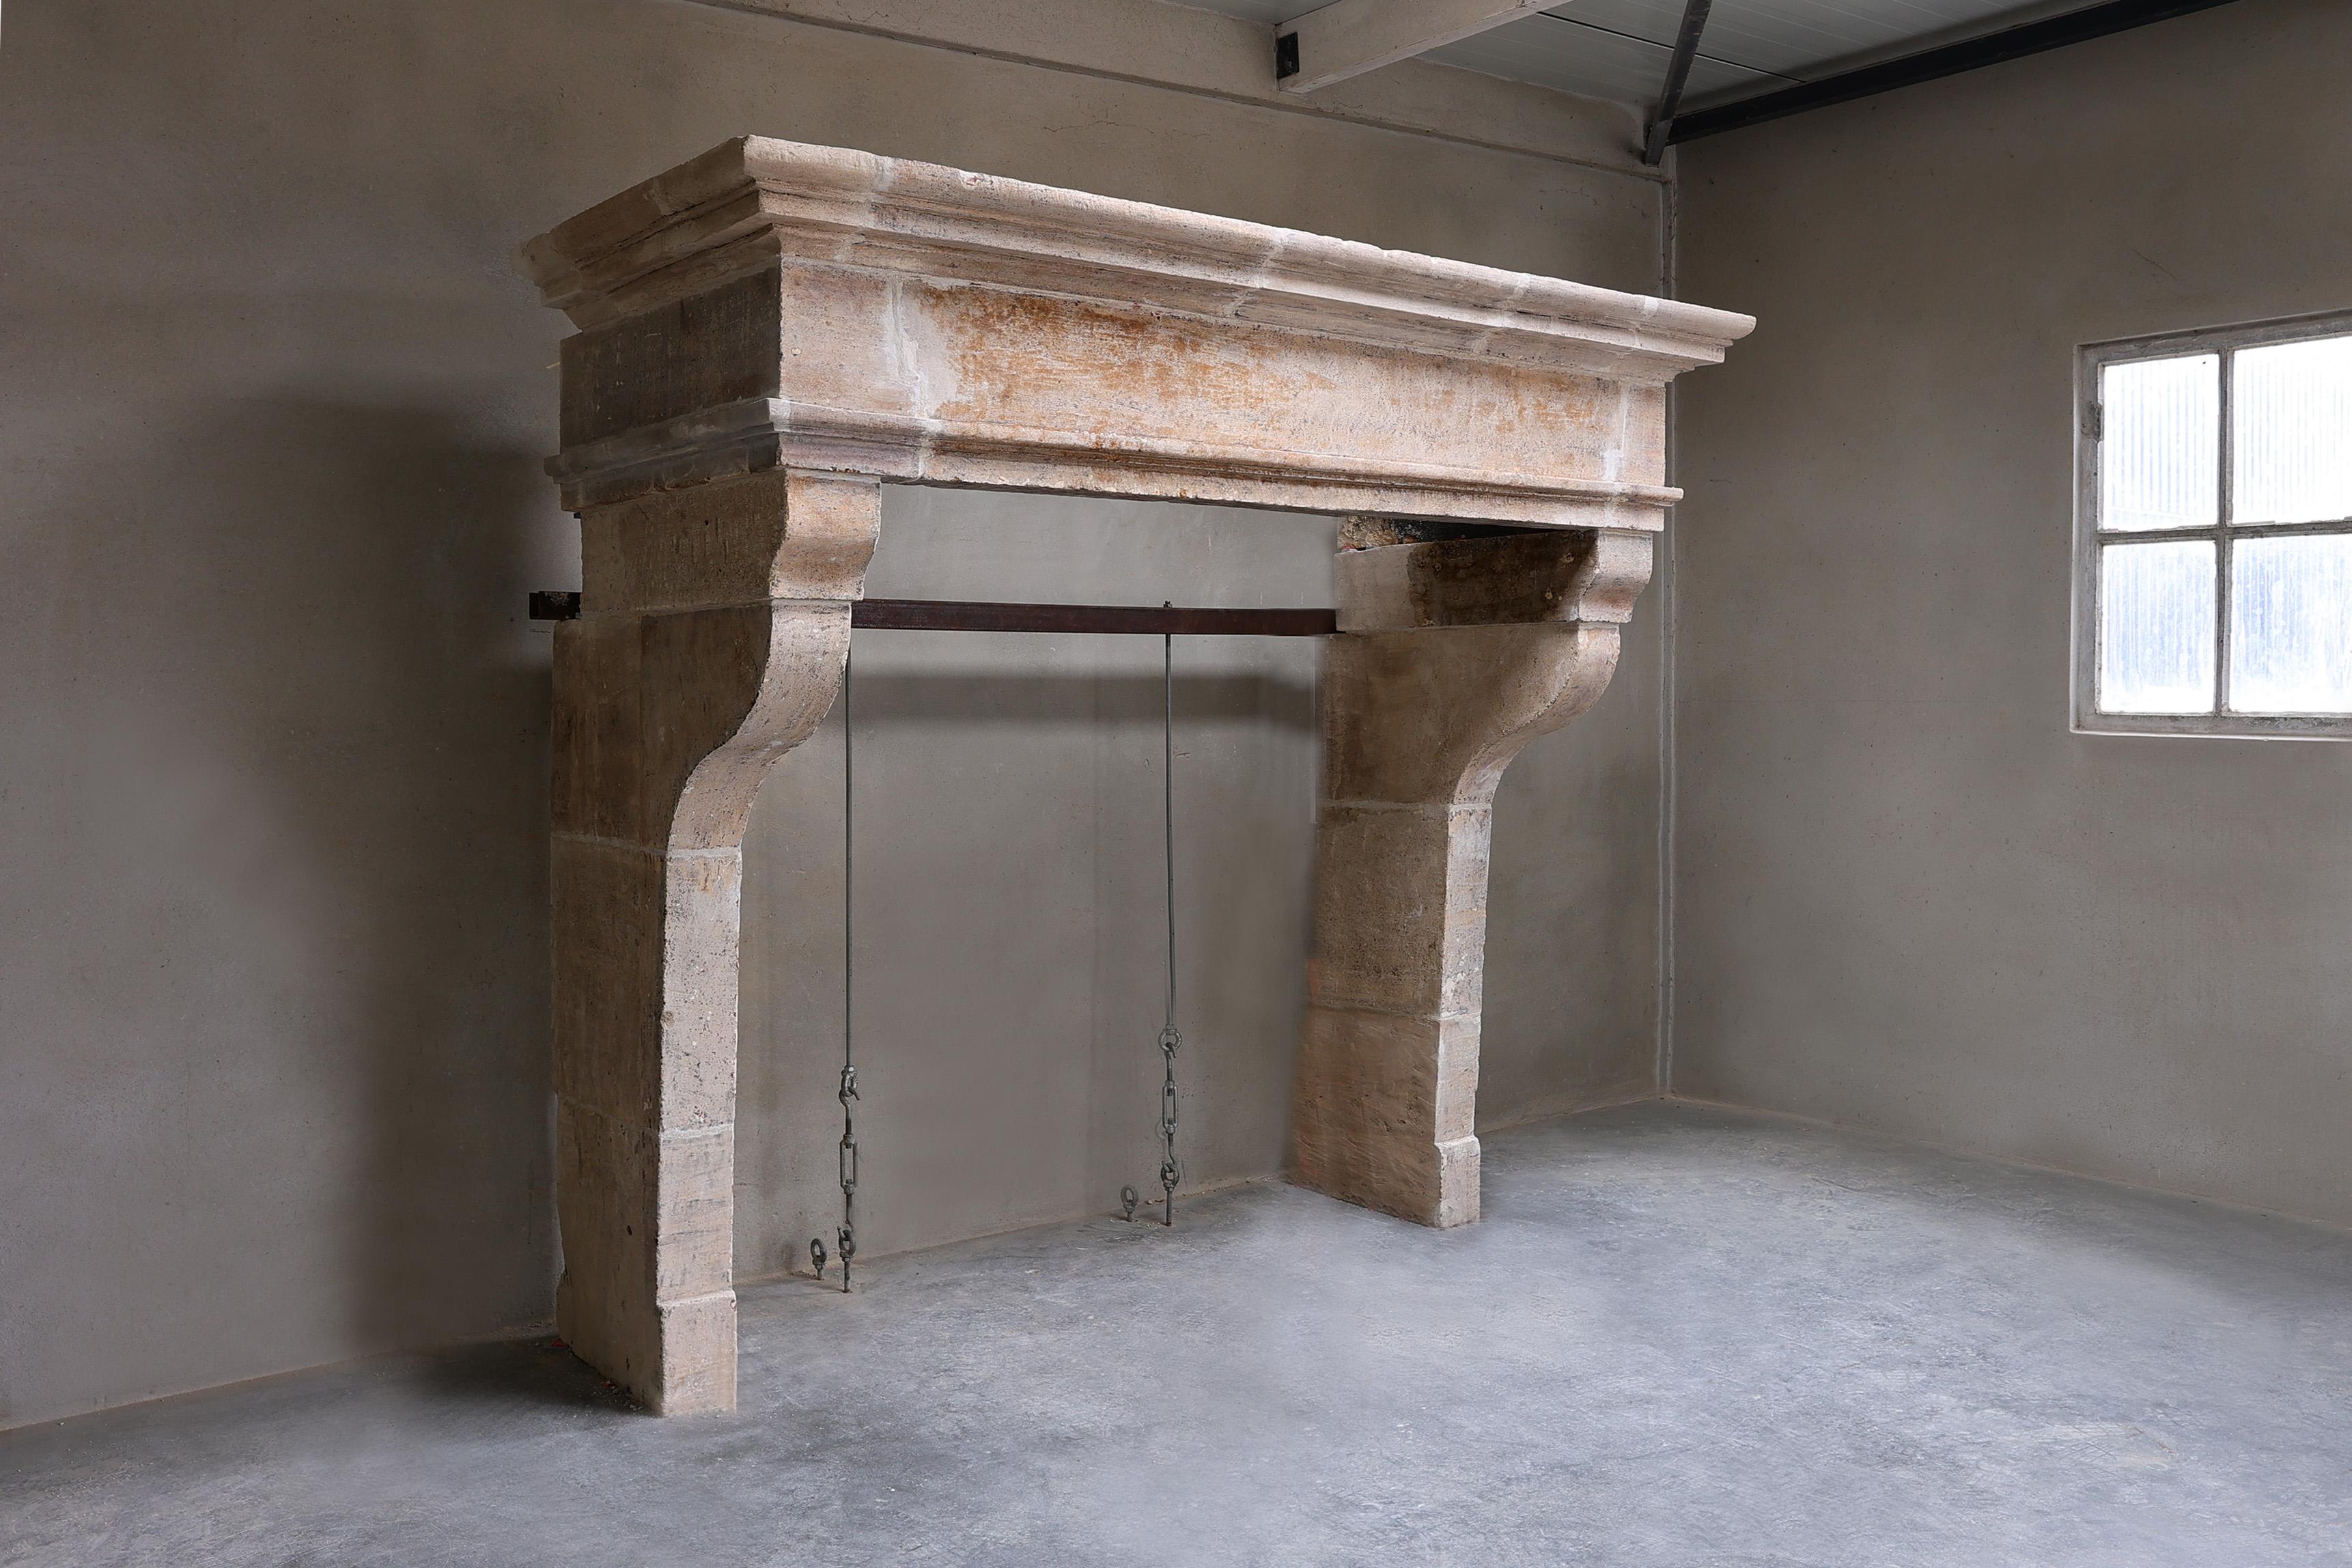 Beautiful robust castle fireplace of French limestone in style of Louis XIII. This stately mantle surround has a wide front section, beautiful lines and half-bent legs. The warm color scheme and beautiful shape and appearance make this a fireplace